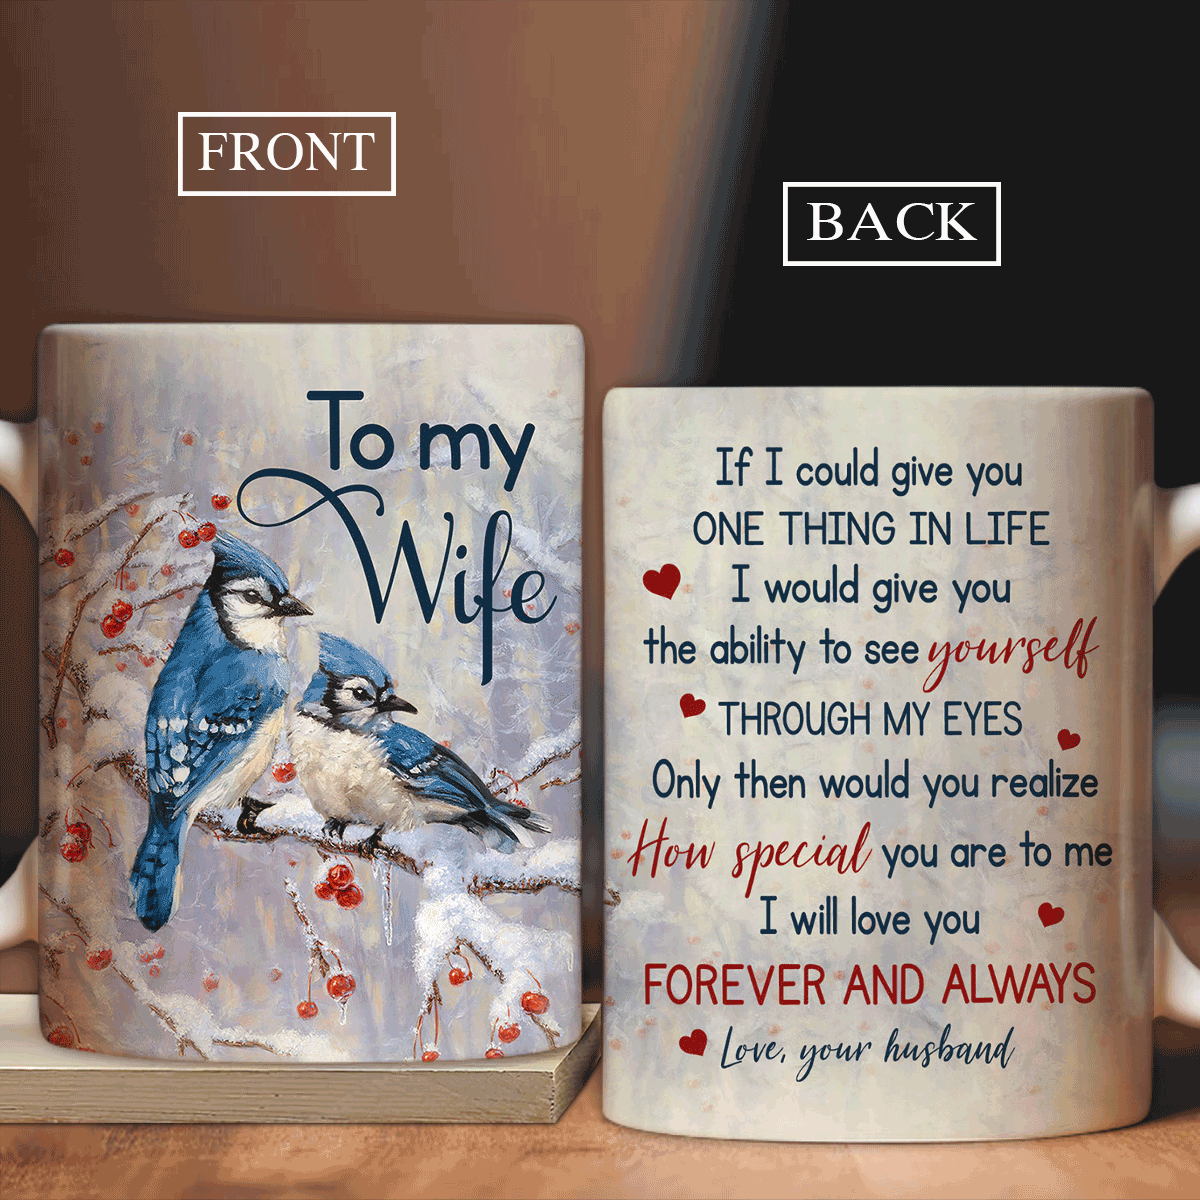 Couple AOP Mug - To my wife, Blue sparrow, Frozen cranberry, White snow Mug - Gift for couple, lover - I will love you forever and always AOP Mug